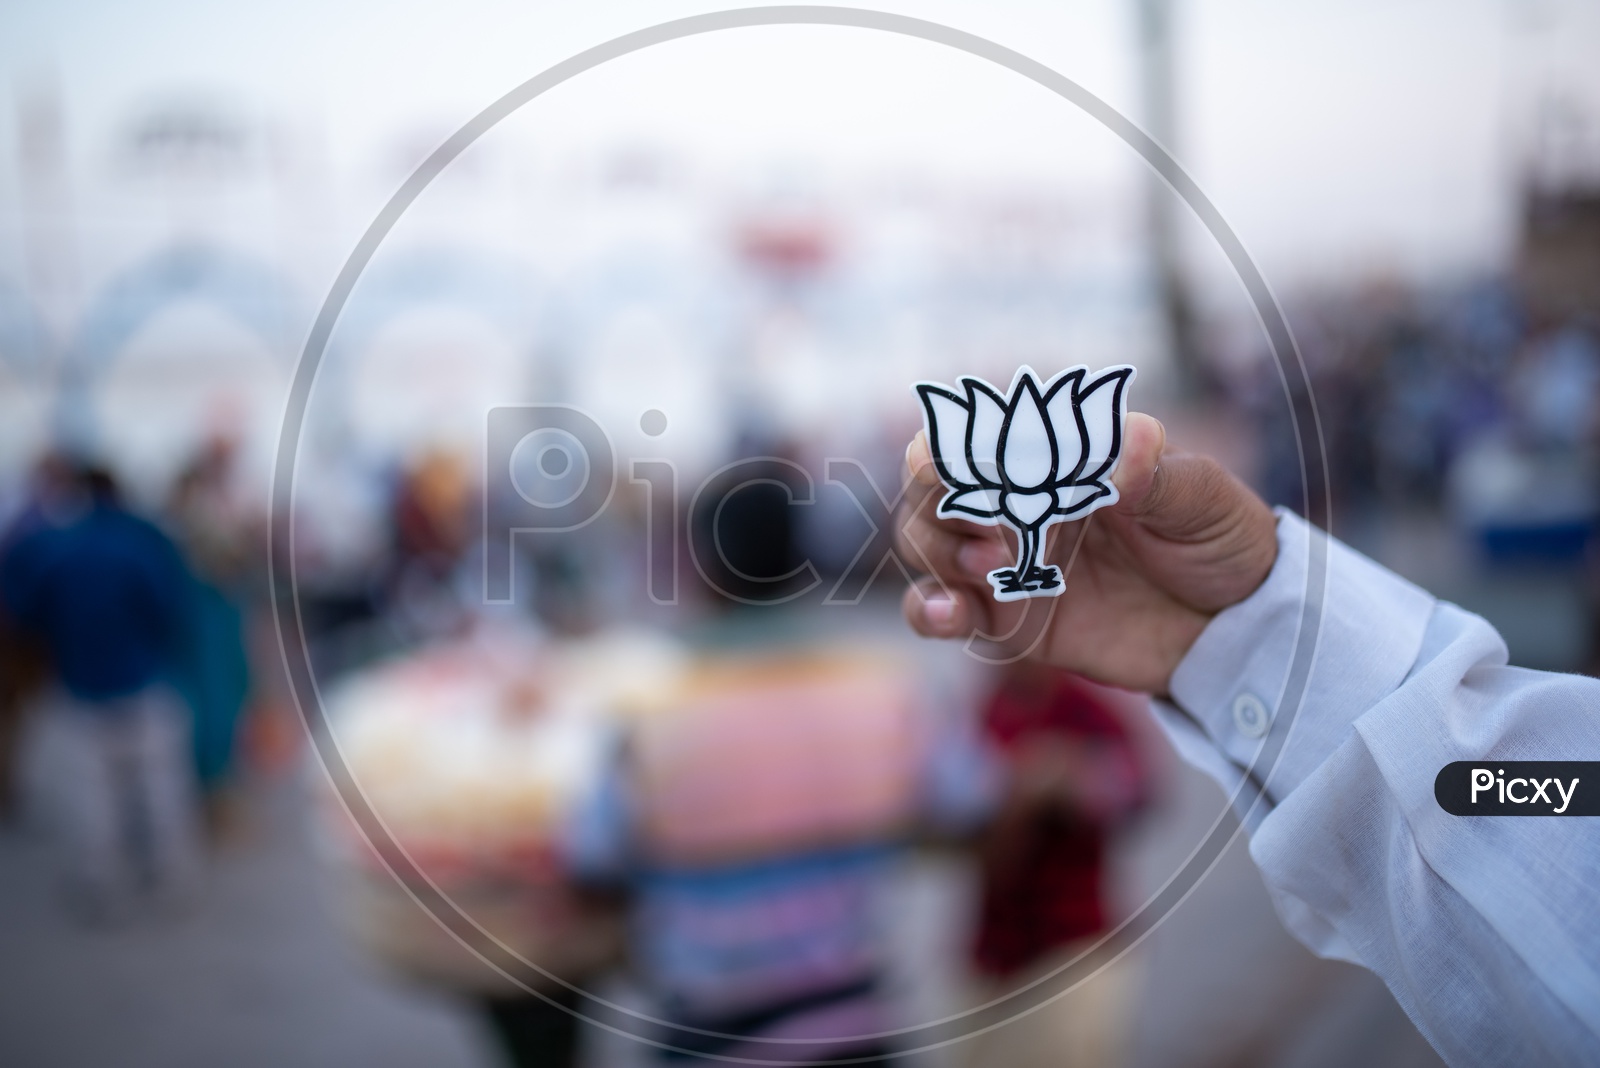 Modi Supporters  Holding  BJP  Lotus Symbol Badges During The Election Campaign For Lak Sabha General Elections 2019